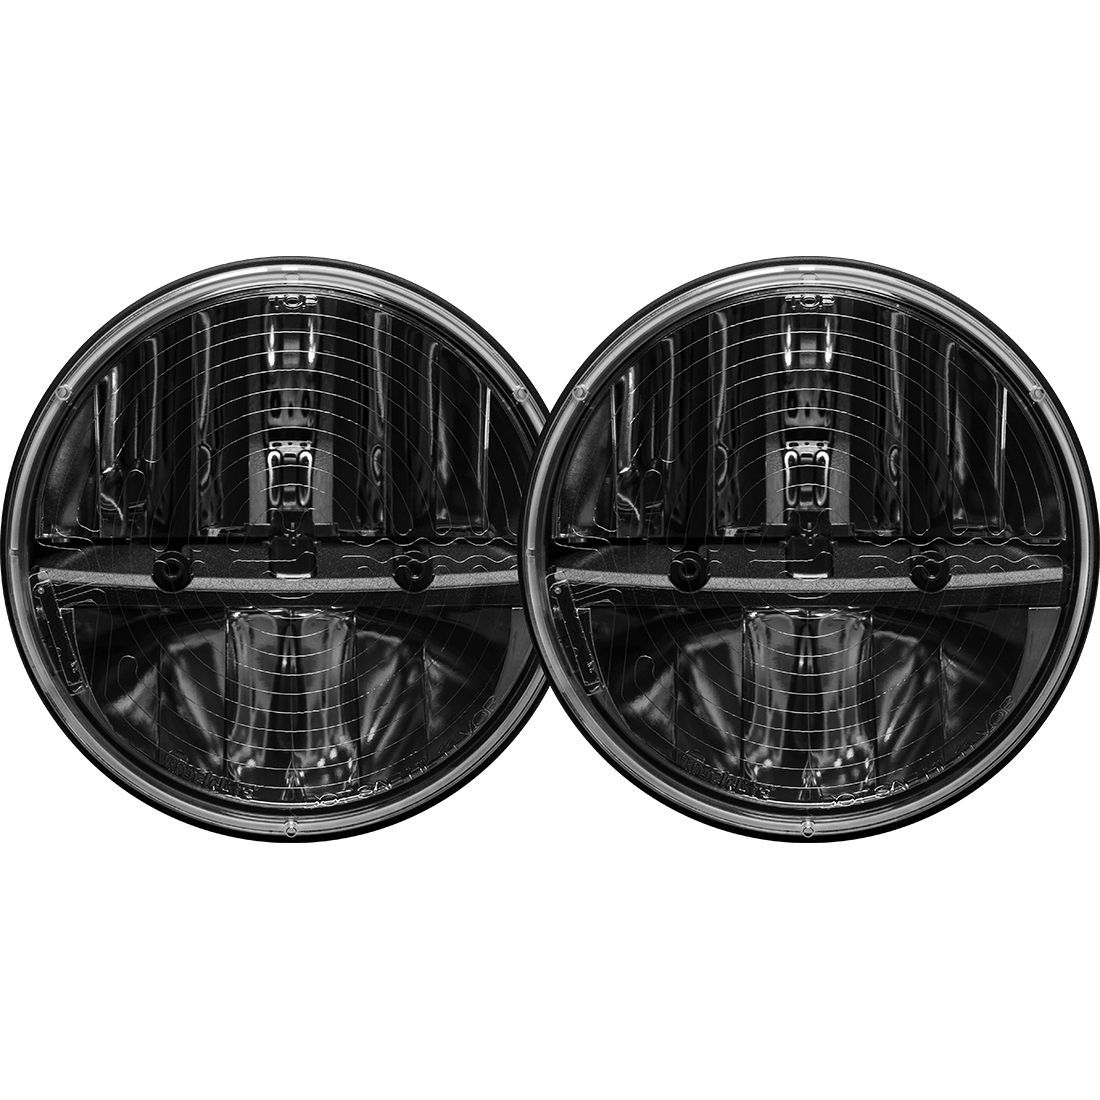 Rigid Industries - Rigid Industries 7 Inch Round Heated Headlight With H13 To H4 Adaptor Pair 55005